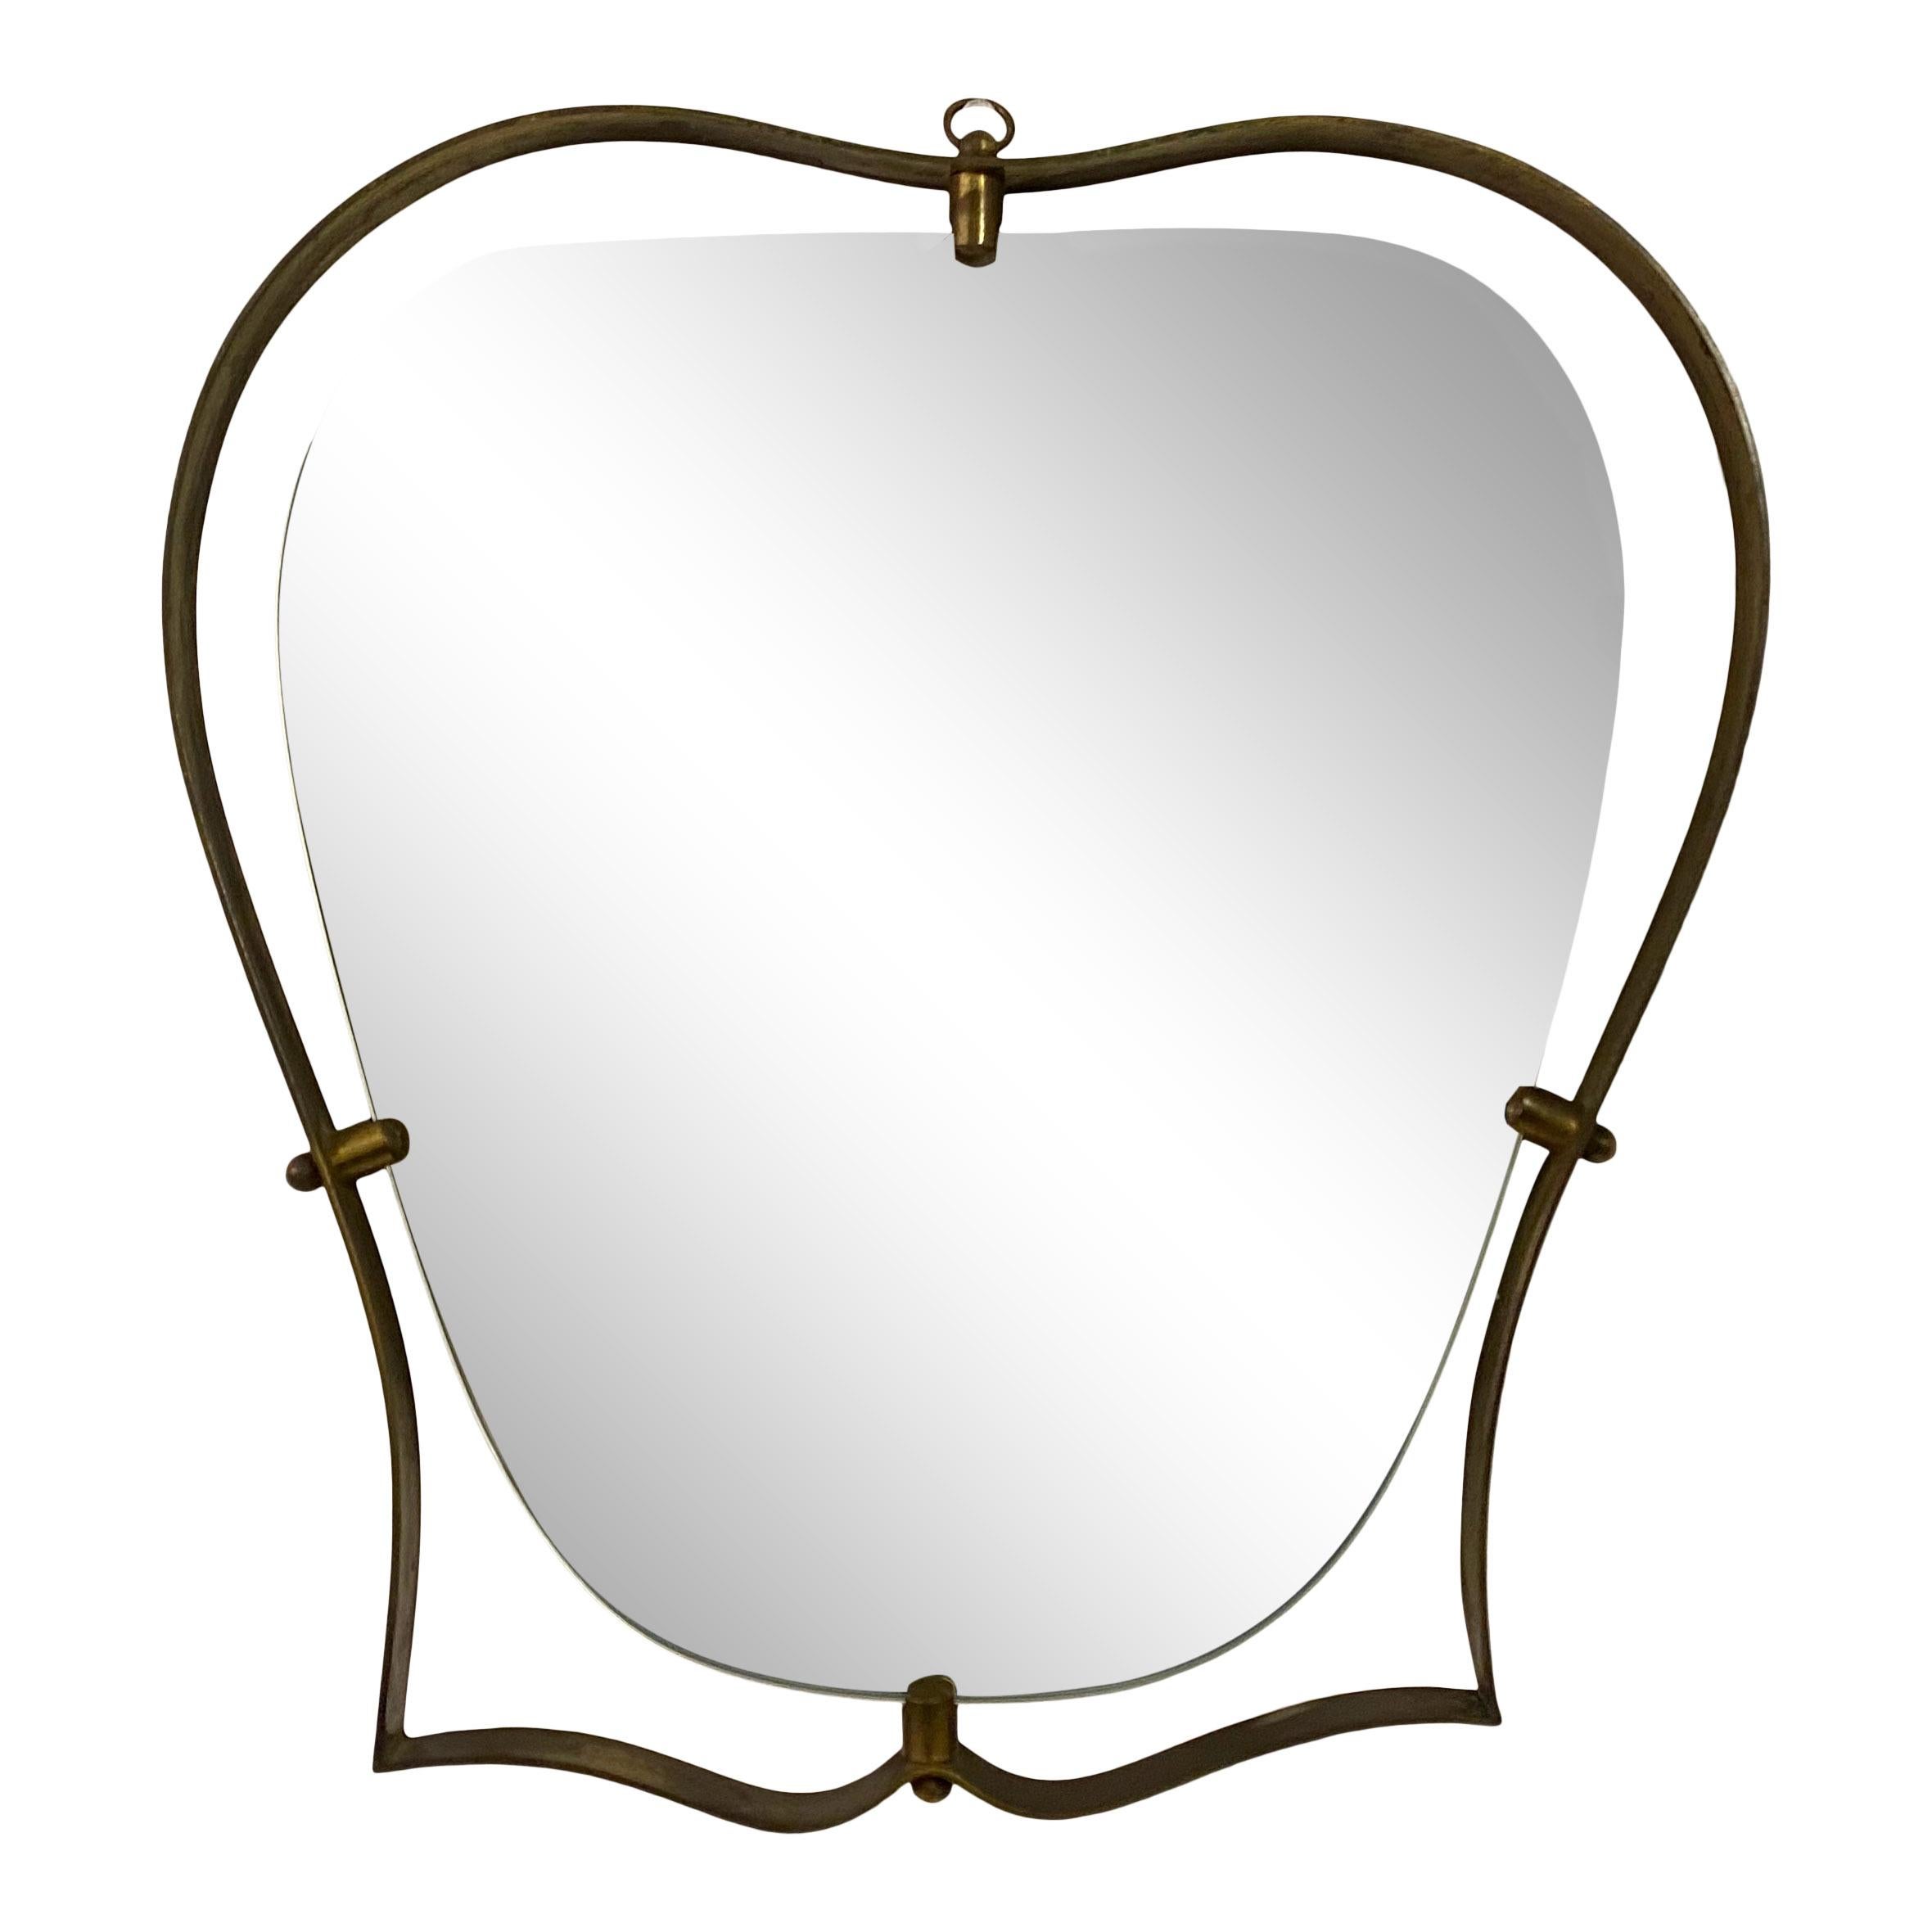 Shaped mirror

Brass frame

Brass mirror supports

Probably not original glass plate

Italy 1950s.
 